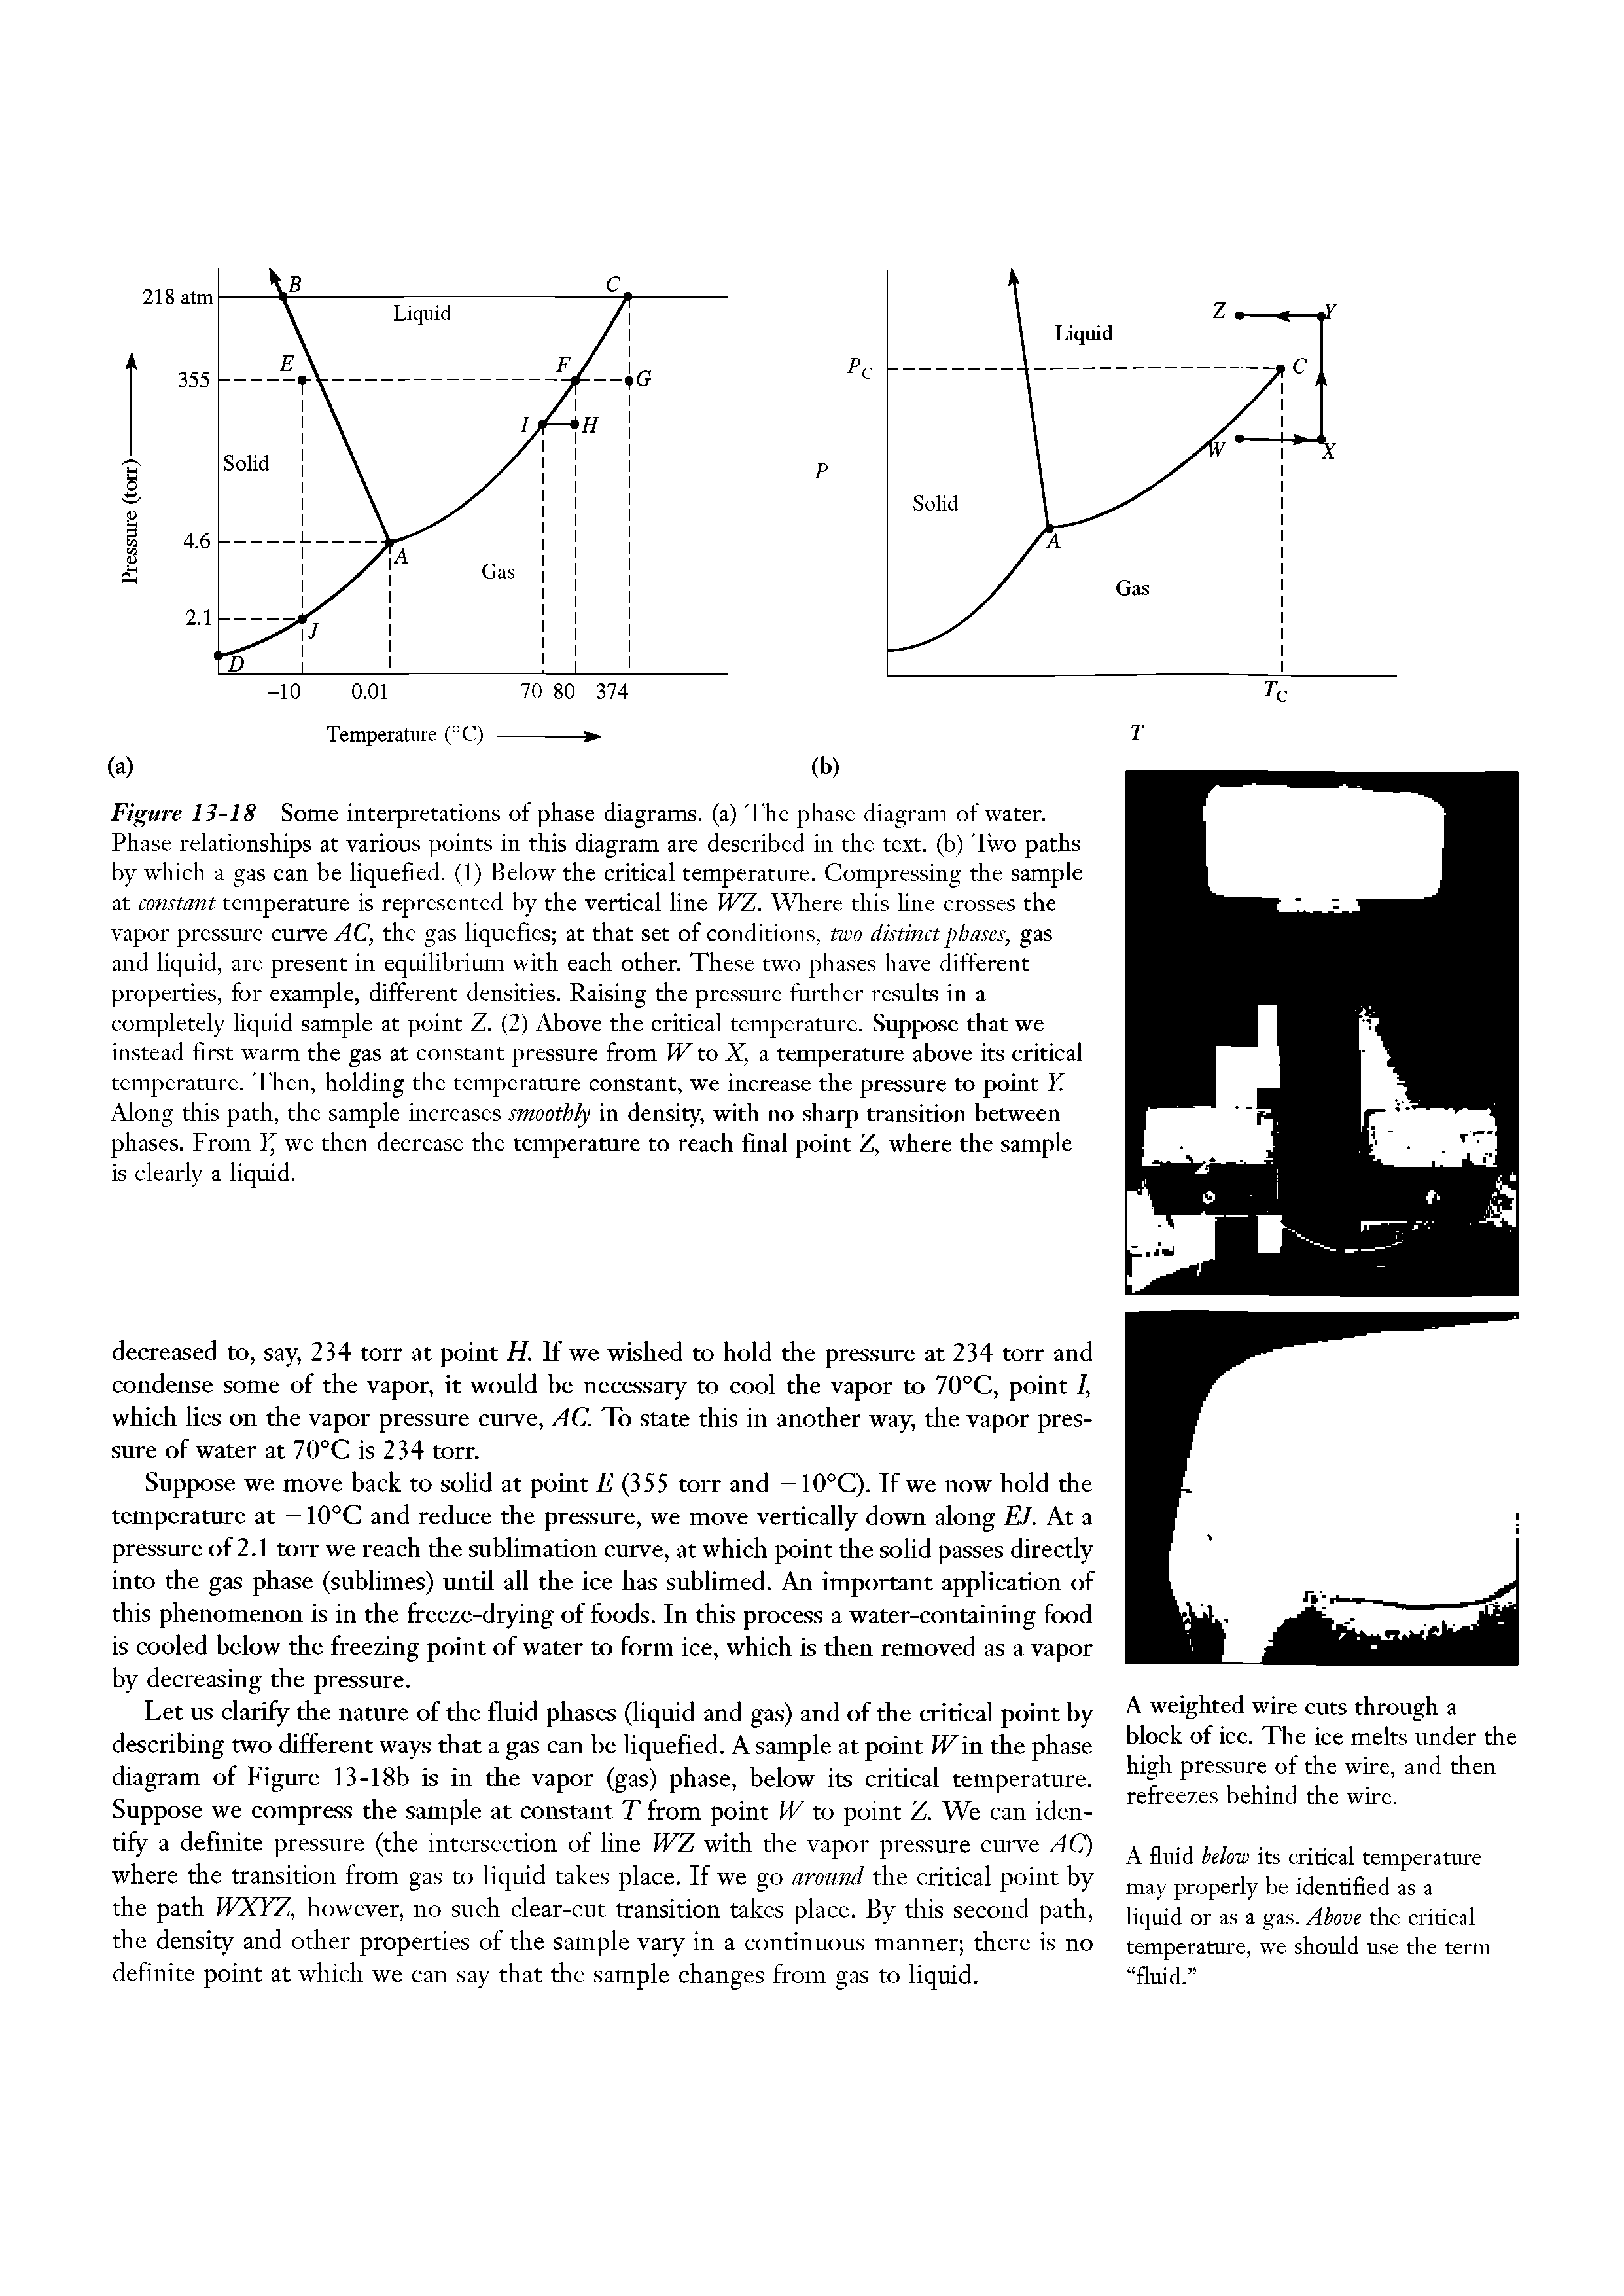 Figure 13-18 Some interpretations of phase diagrams, (a) The phase diagram of water. Phase relationships at various points in this diagram are described in the text, (b) Two paths by which a gas can be liquefied. (1) Below the critical temperature. Compressing the sample at constant temperature is represented by the vertical line WZ. Where this line crosses the vapor pressure curve AC, the gas liquefies at that set of conditions, two distinct phases, gas and liquid, are present in equilibrium with each other. These two phases have different properties, for example, different densities. Raising the pressure further results in a completely liquid sample at point Z. (2) Above the critical temperature. Suppose that we instead first warm the gas at constant pressure from W to X, a temperature above its critical temperamre. Then, holding the temperamre constant, we increase the pressure to point Y. Along this path, the sample increases smoothly in density, with no sharp transition between phases. From Y, we then decrease the temperature to reach final point Z, where the sample is clearly a liquid.